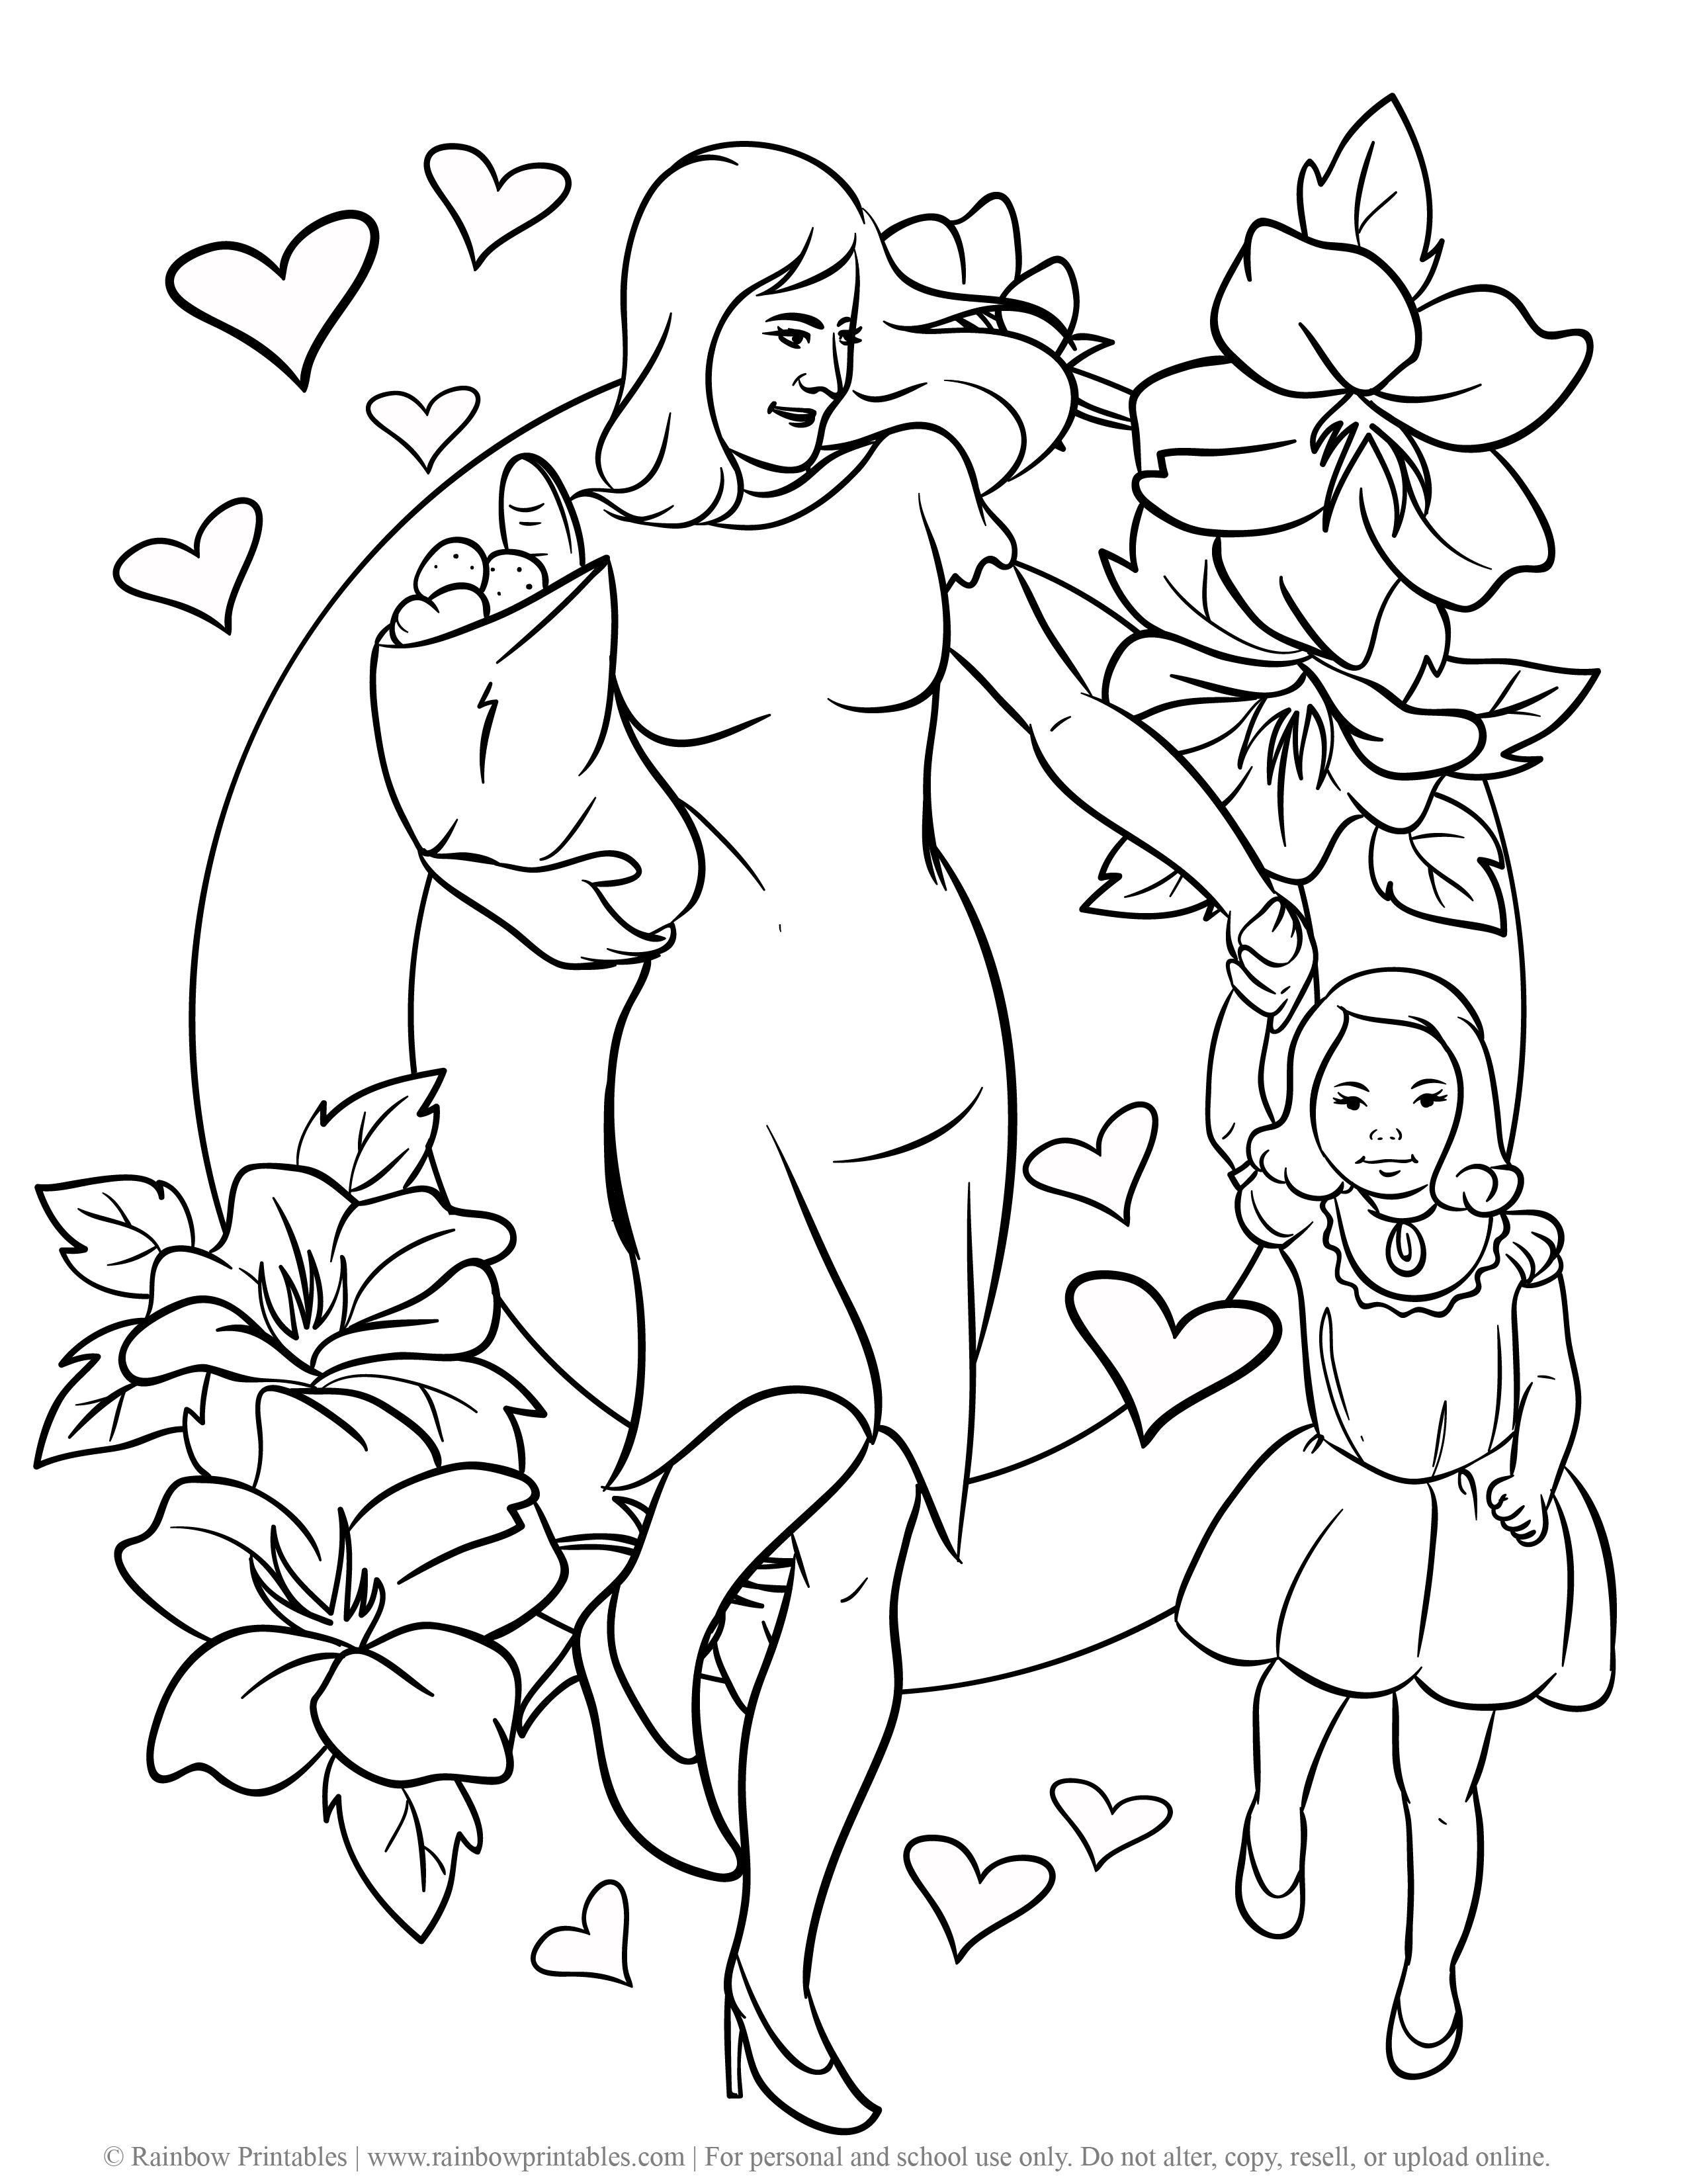 Mother's Day Coloring Pages - Rainbow Printables